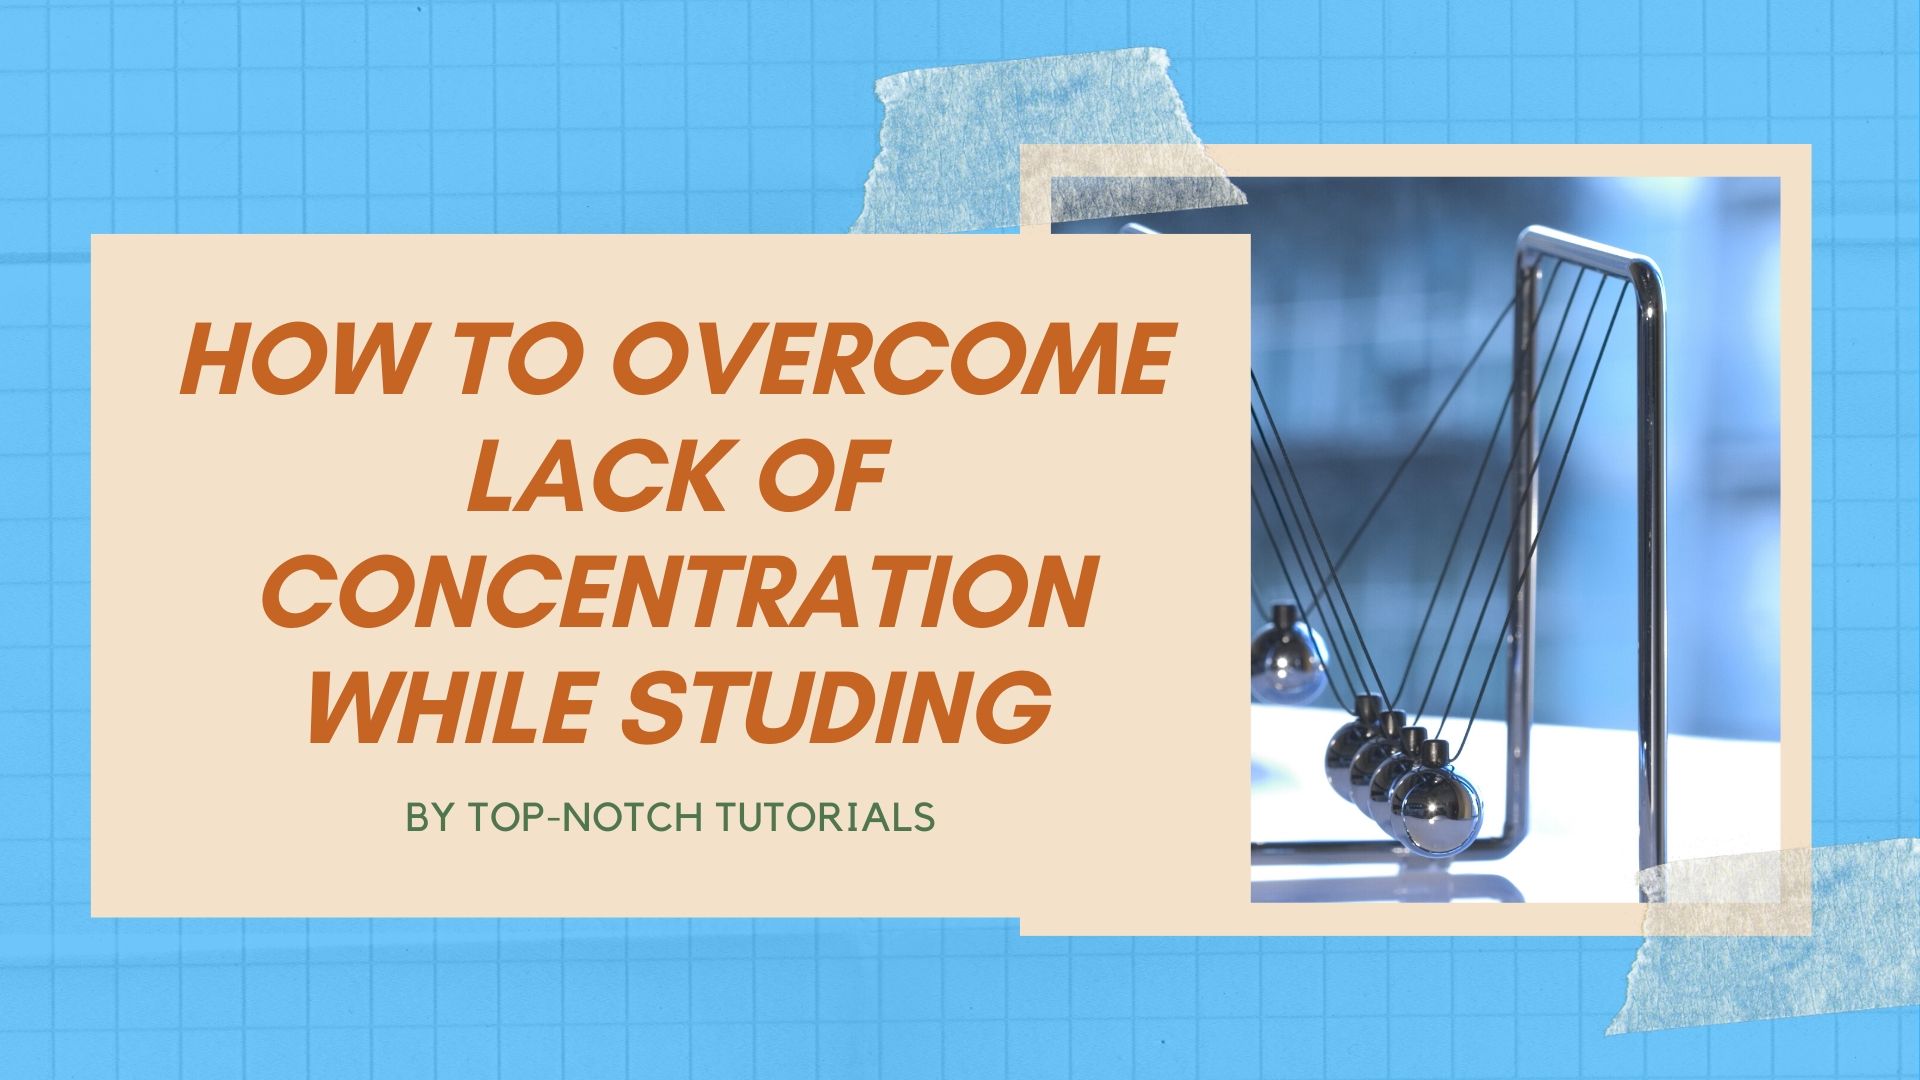 How to overcome lack of concentration while studying?